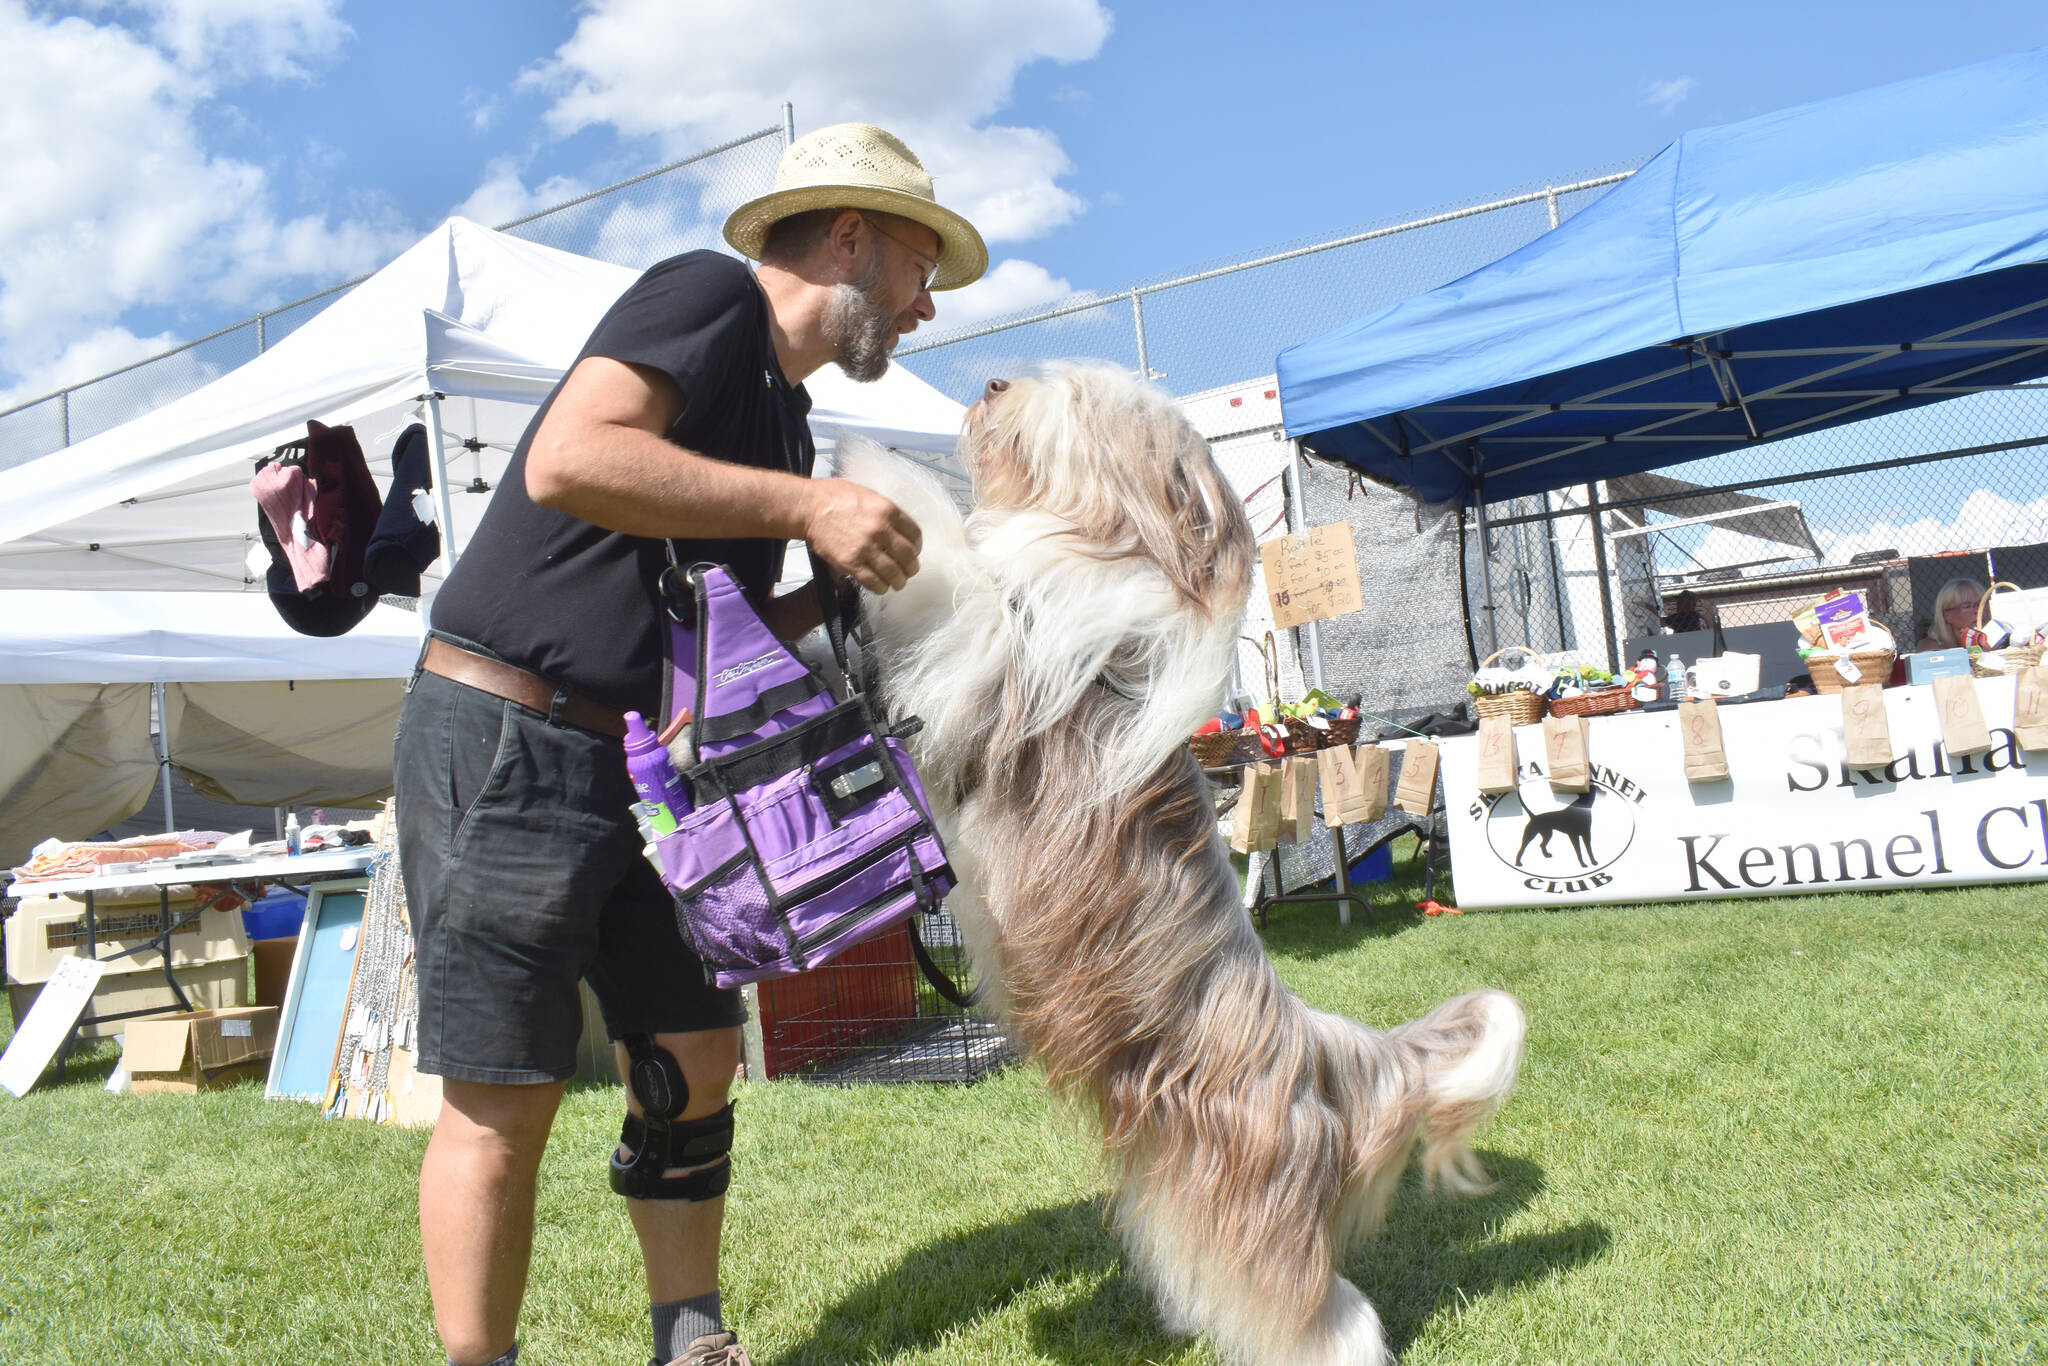 James Young of Naramata and his bearded collie Loki have some fun at the Skaha Kennel Club dog show in Summerland prior to the COVID-19 pandemic. (Black Press file photo)